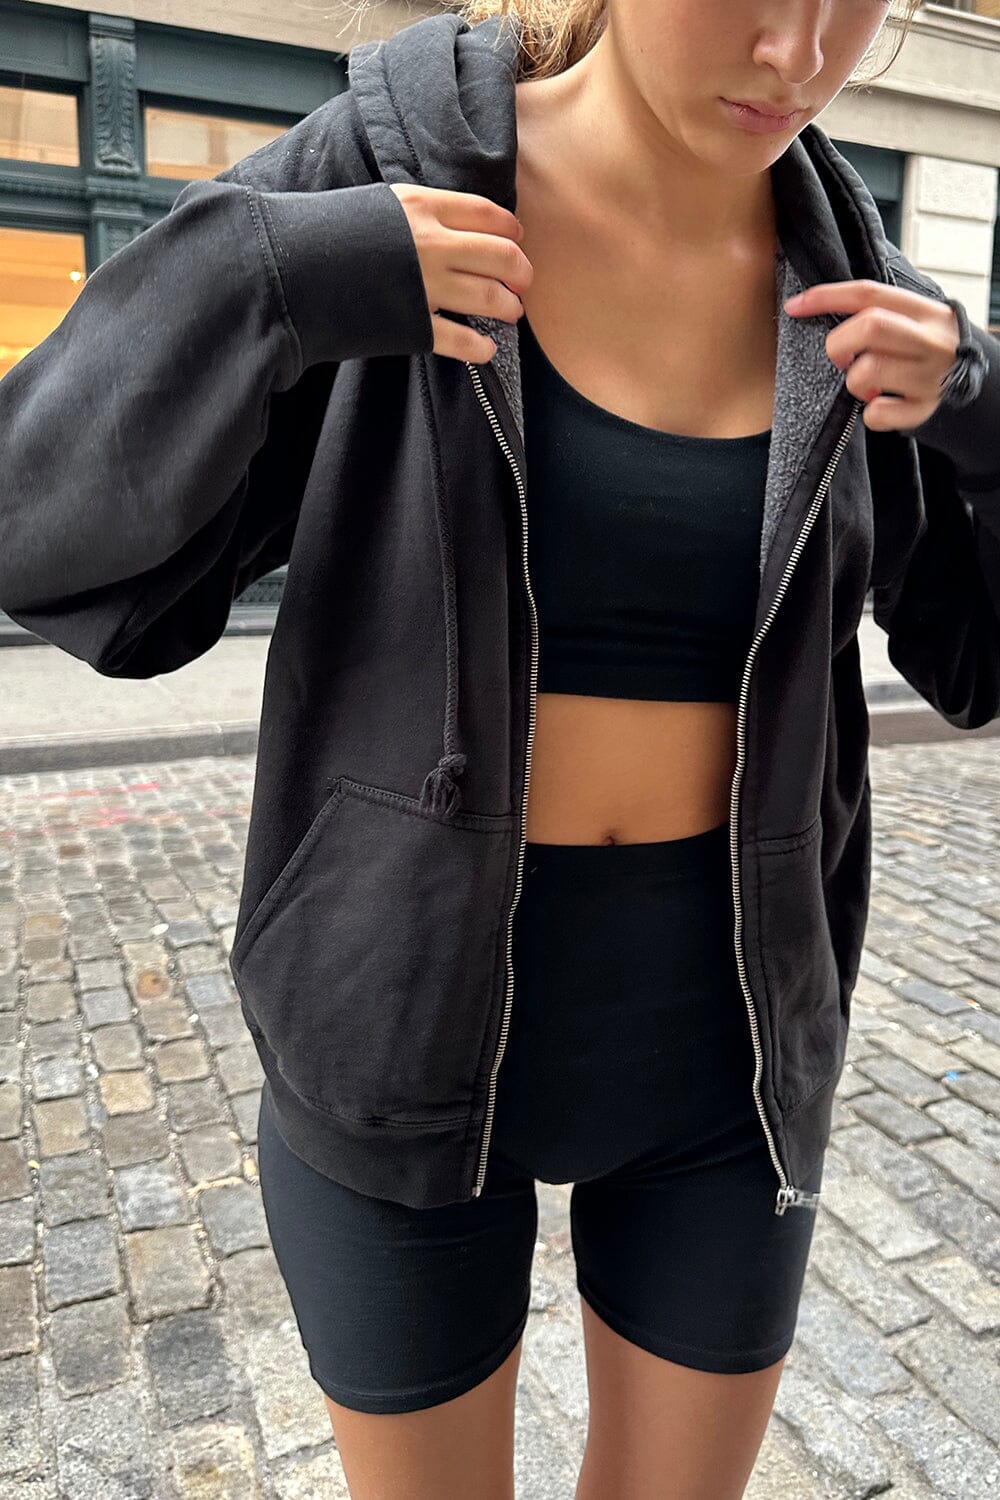 Brandy Melville oversized South Bay California, off the lip hoodie Size  undefined - $65 - From Jessica